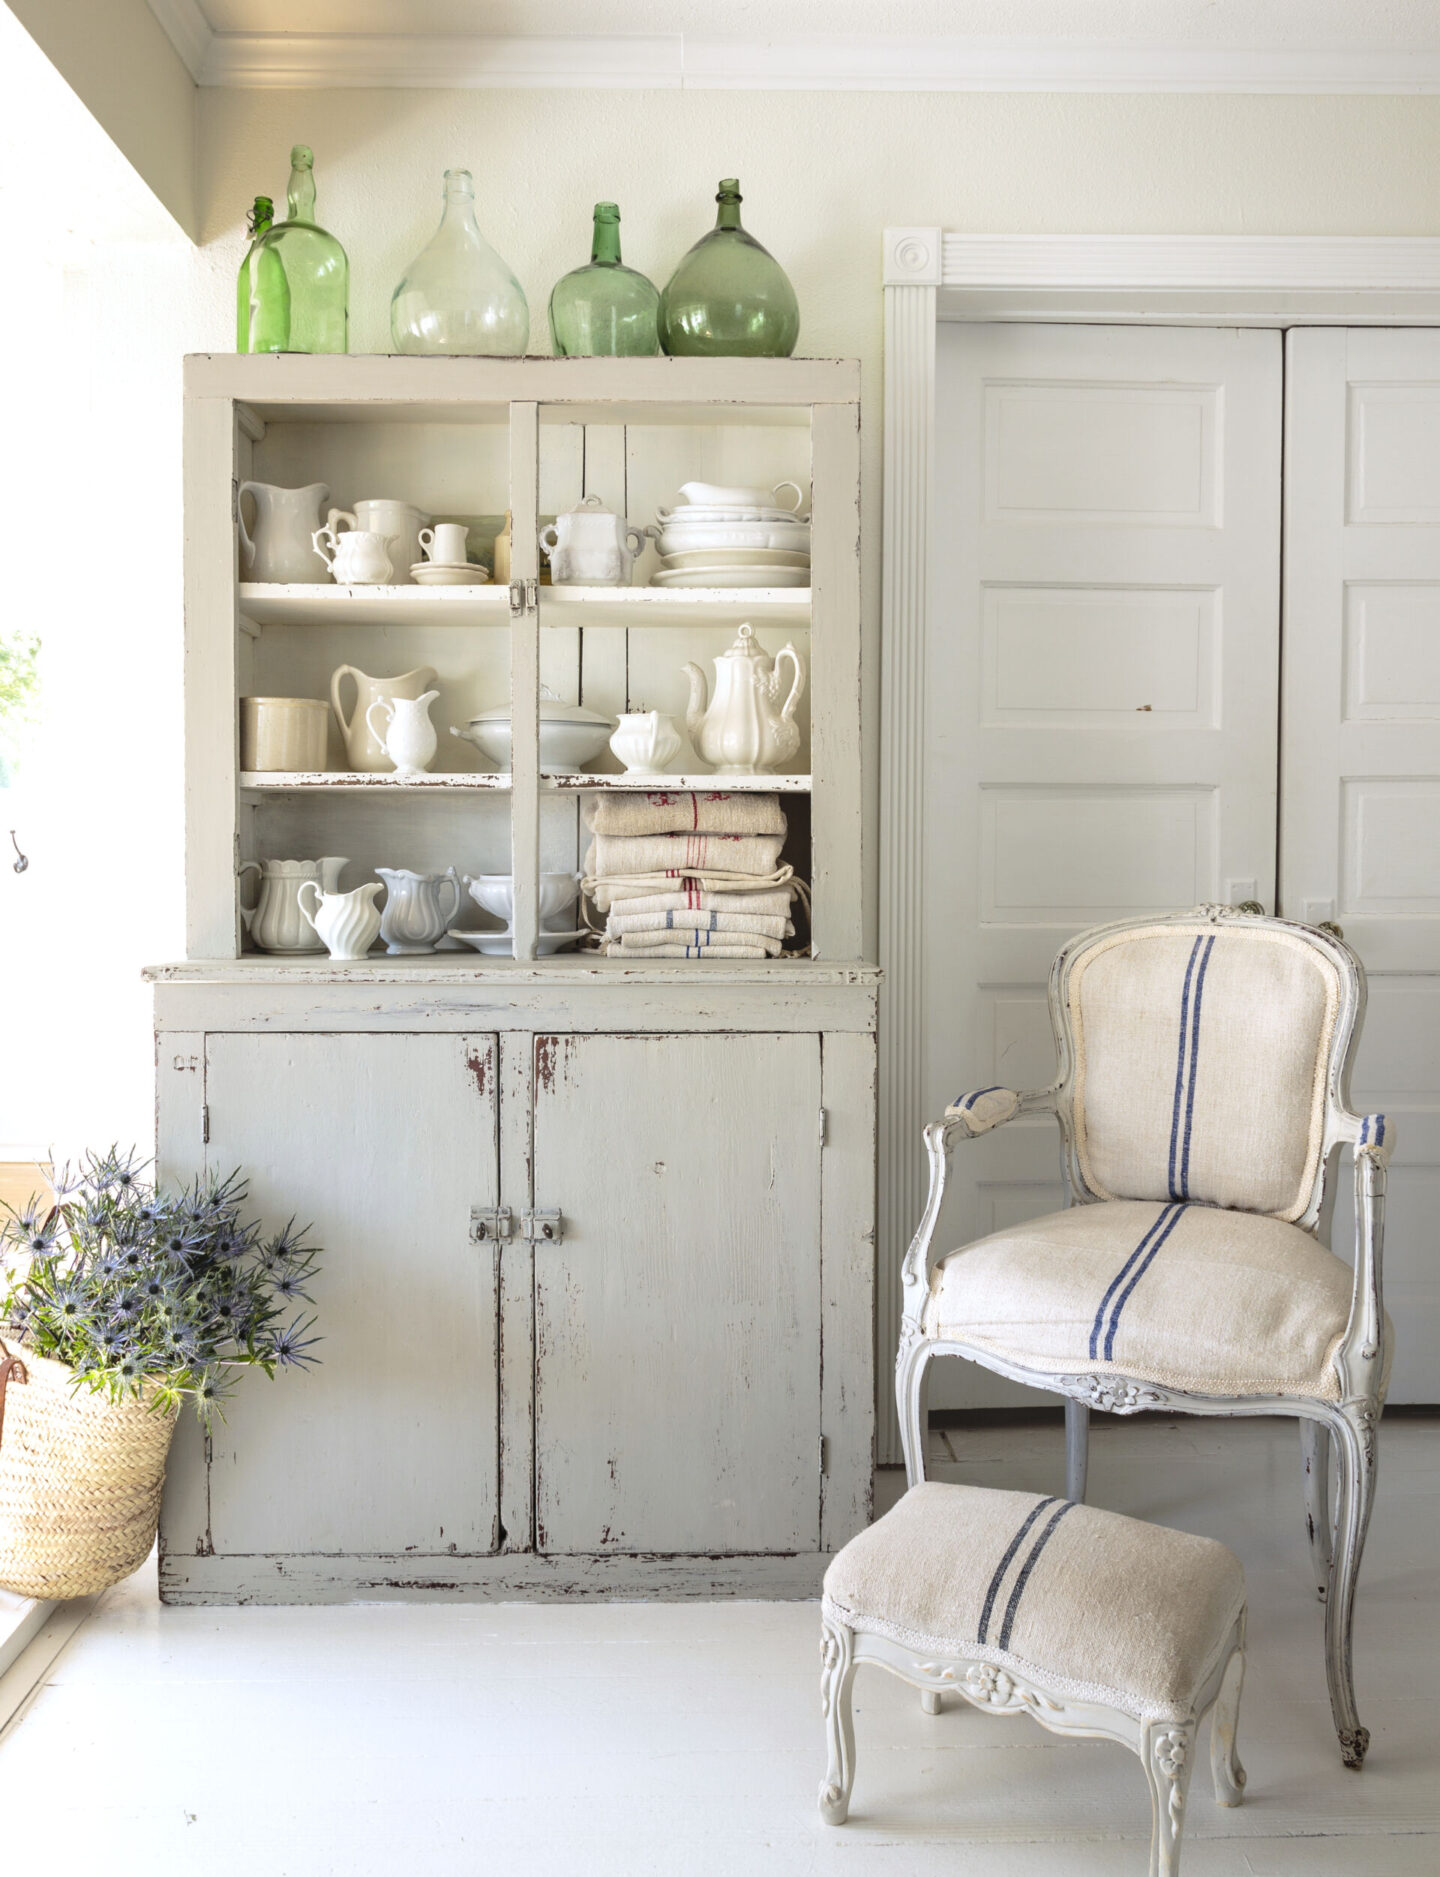 Lovely vintage country cupboard with Louis style chair - from Fifi O'Neill's SHADES OF WHITE. Photo by Mark Lohman.